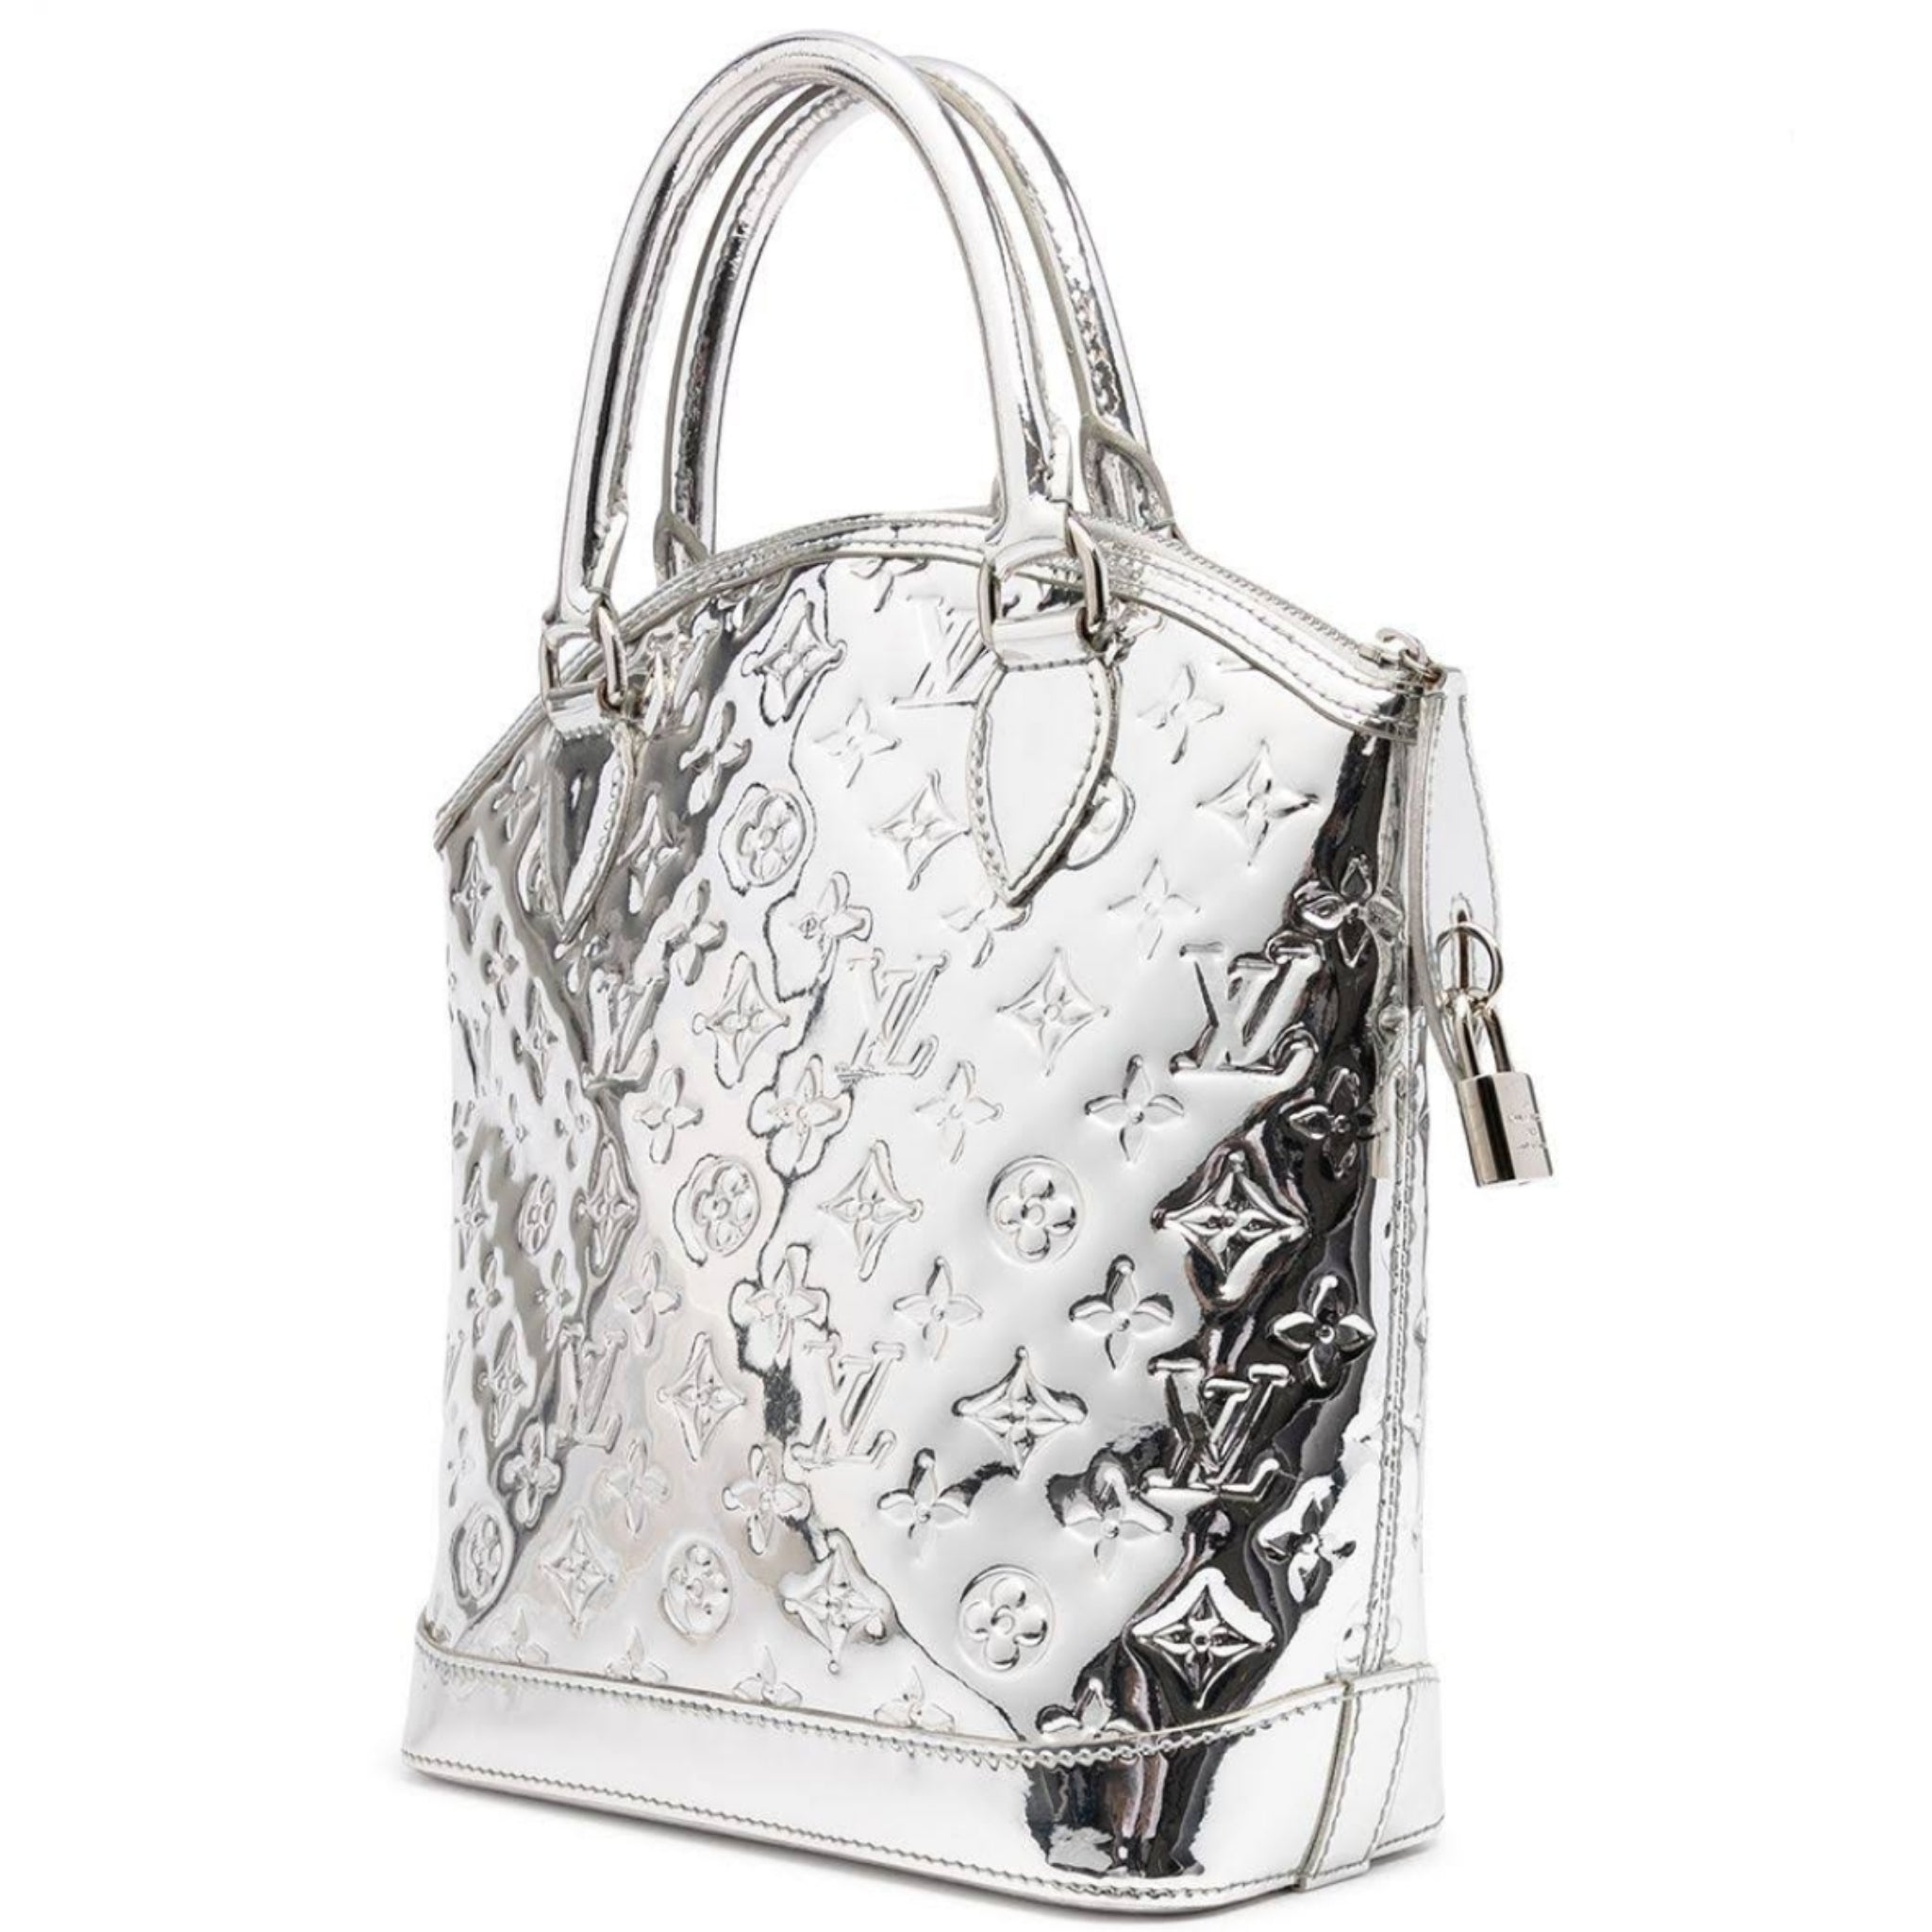 Lockit leather handbag Louis Vuitton Silver in Leather - 32698256